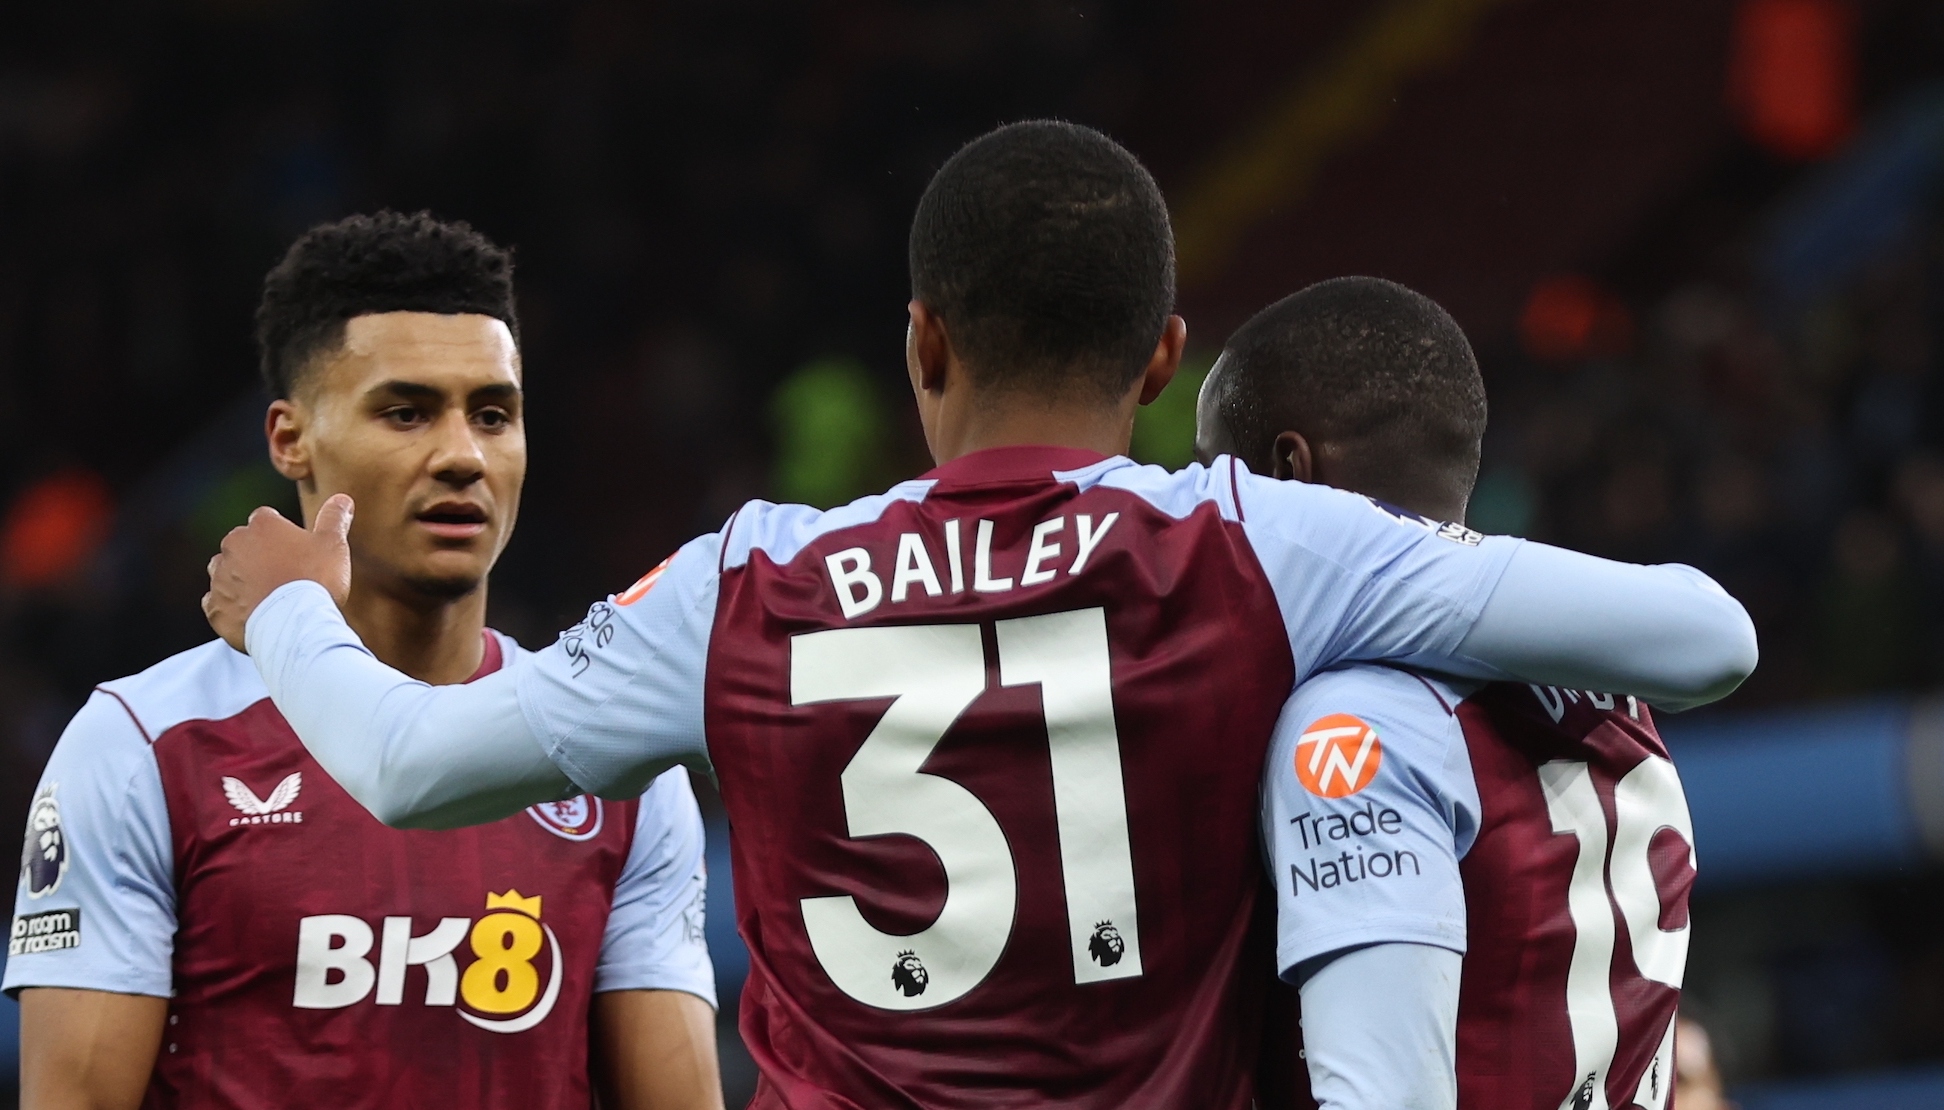 Aston Villa return to winning ways with dramatic victory over Burnley 27